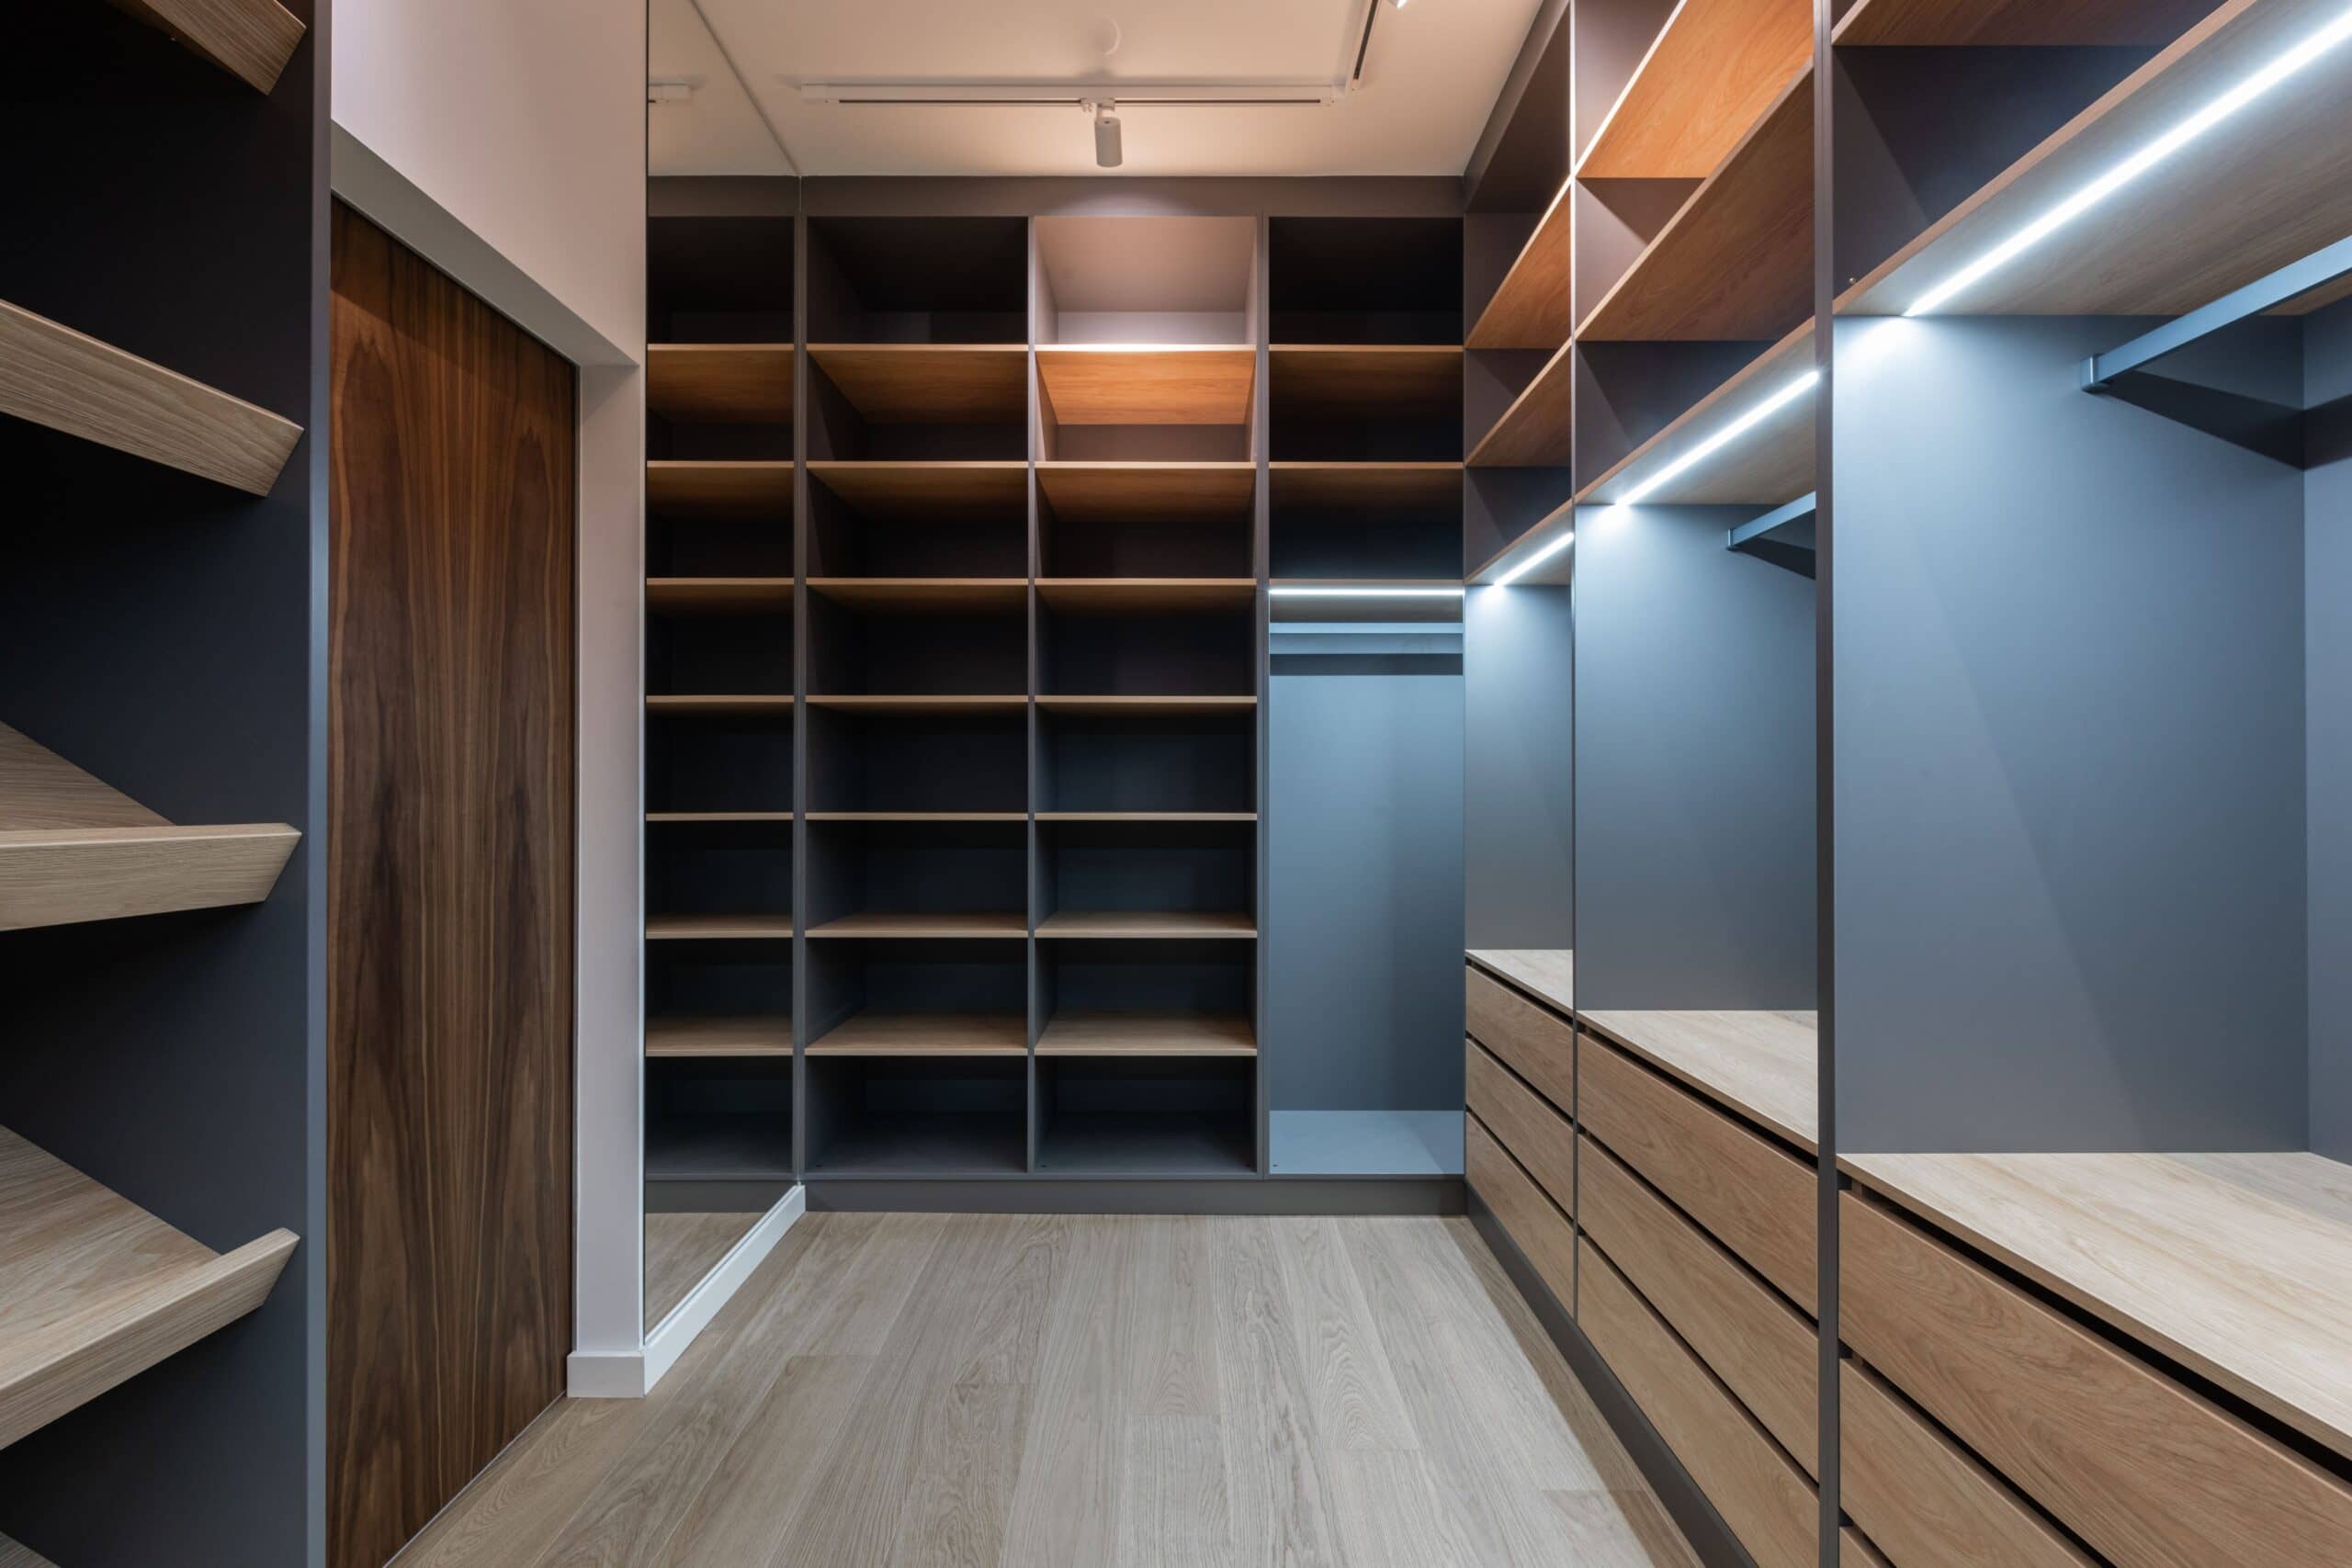 What Is The Difference Between Fitted And Built-In Wardrobes?